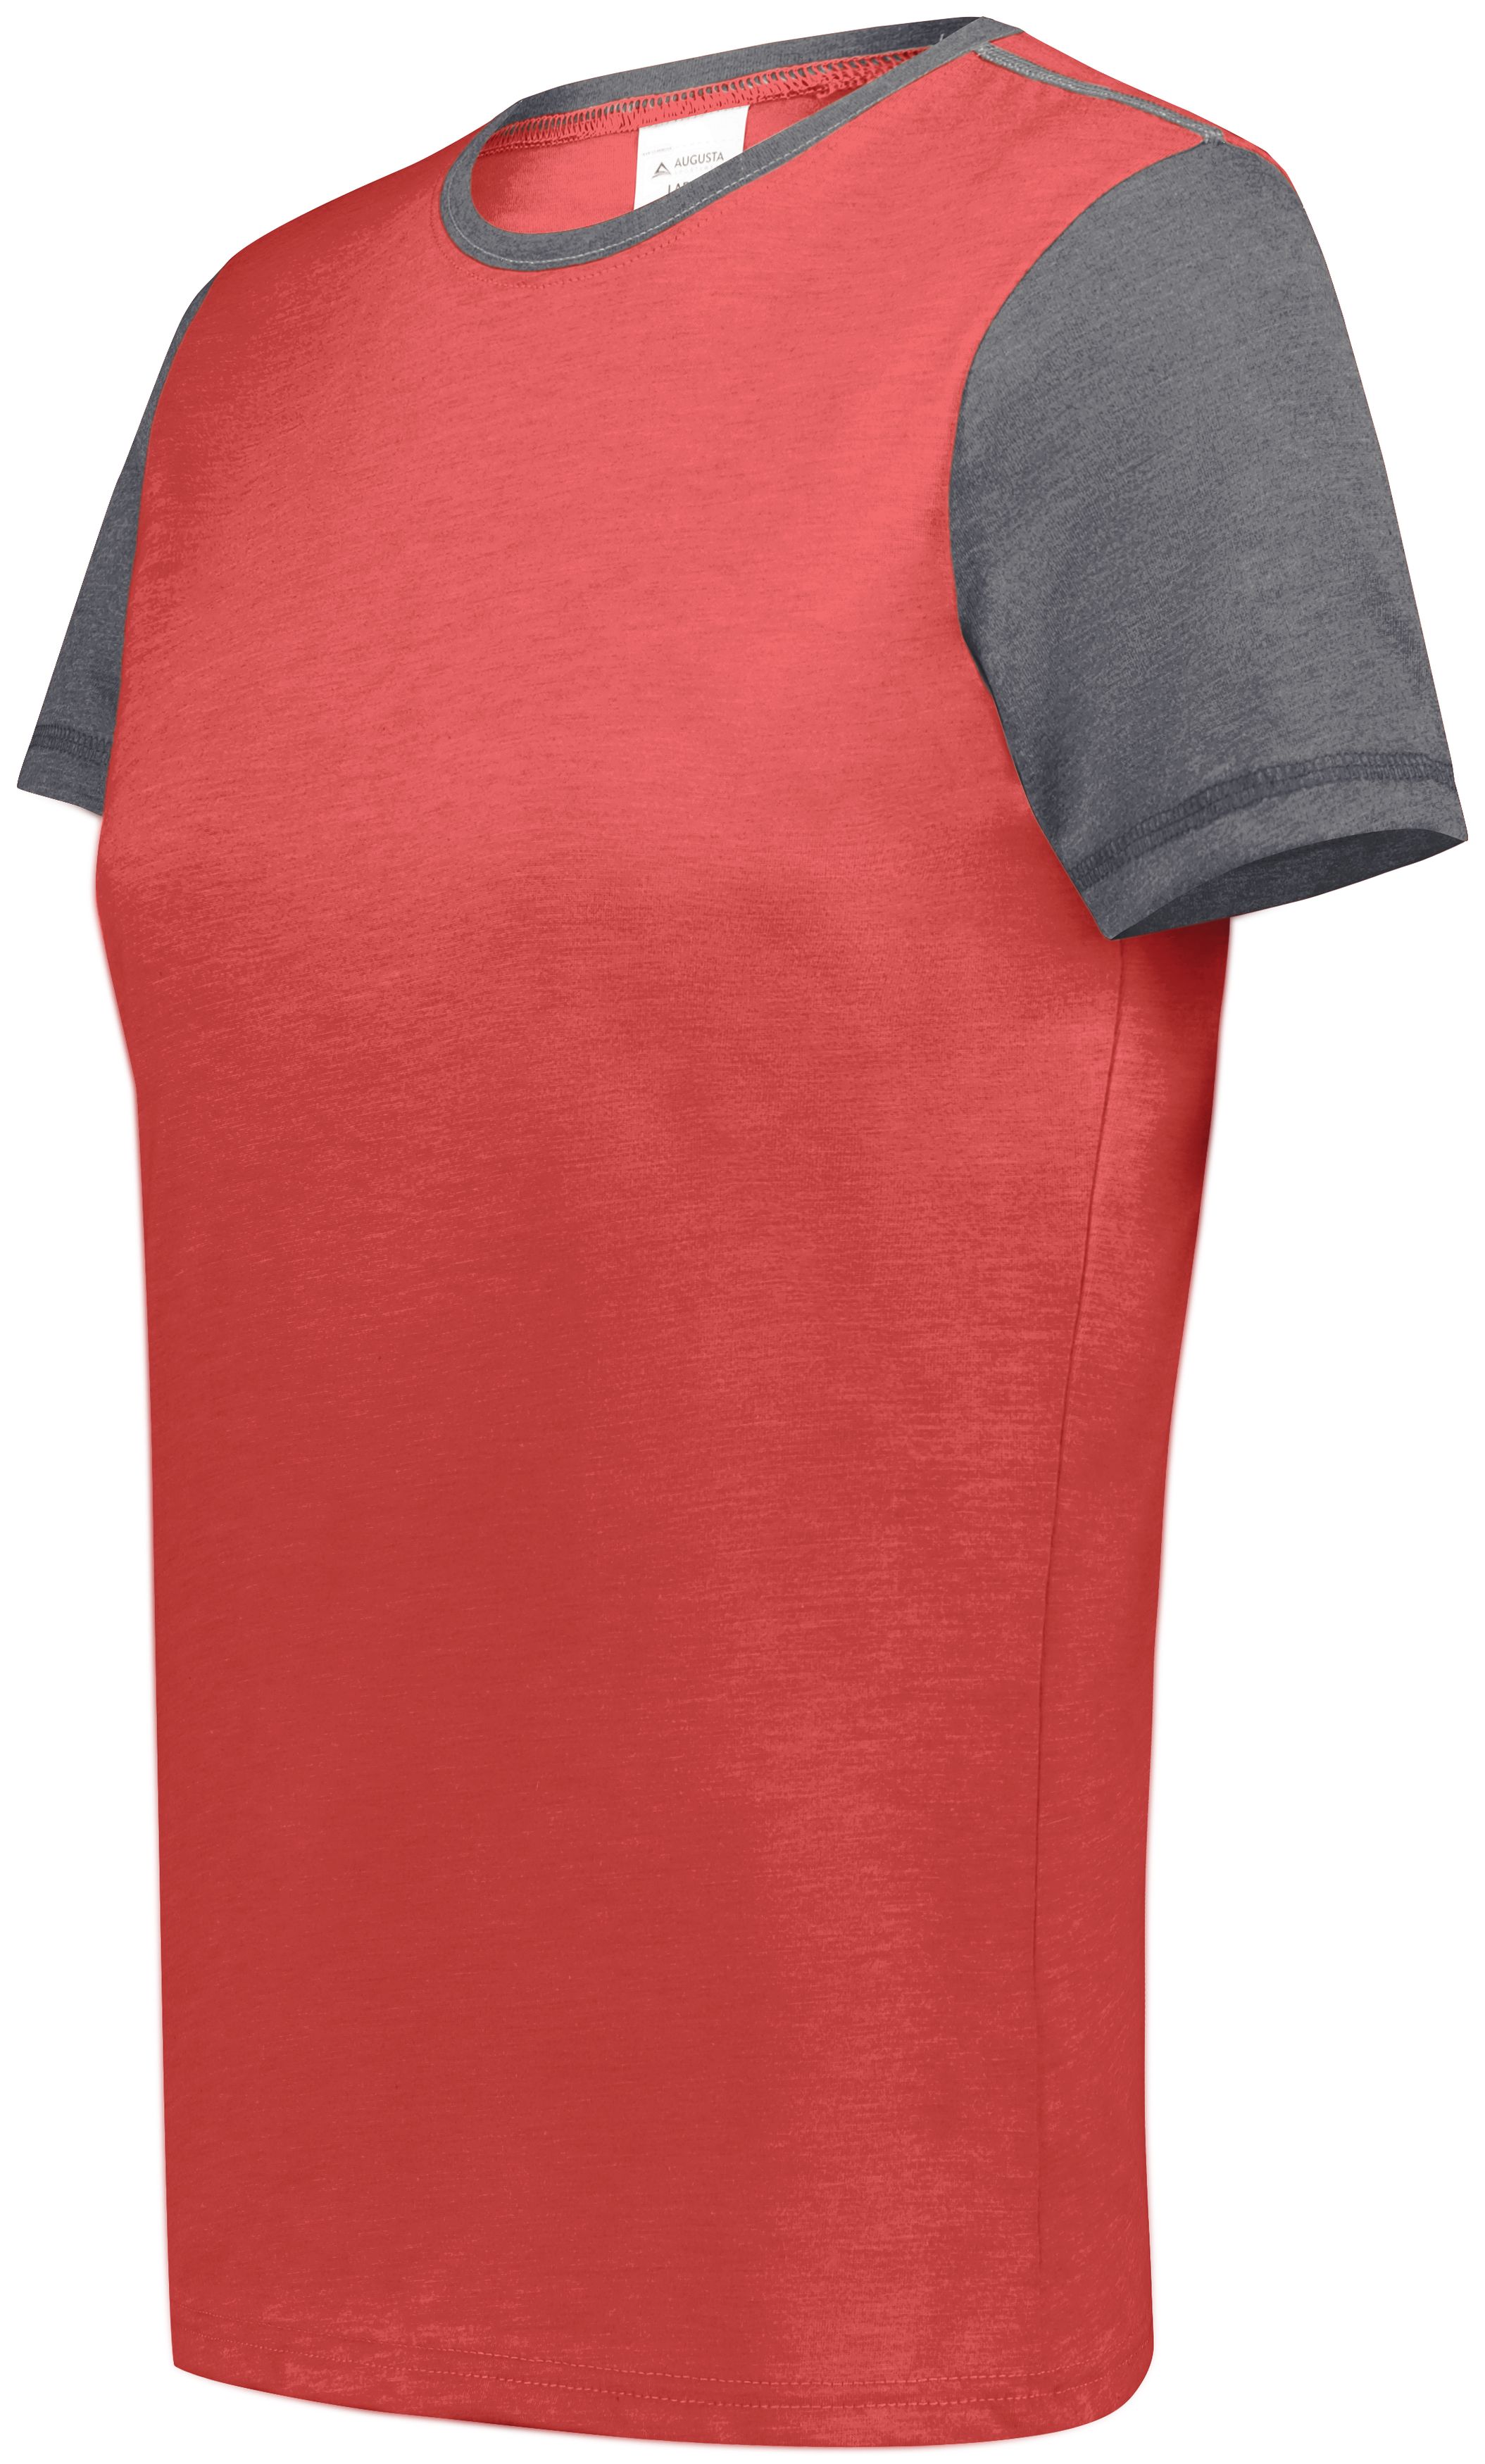 click to view Scarlet Heather/Carbon Heather